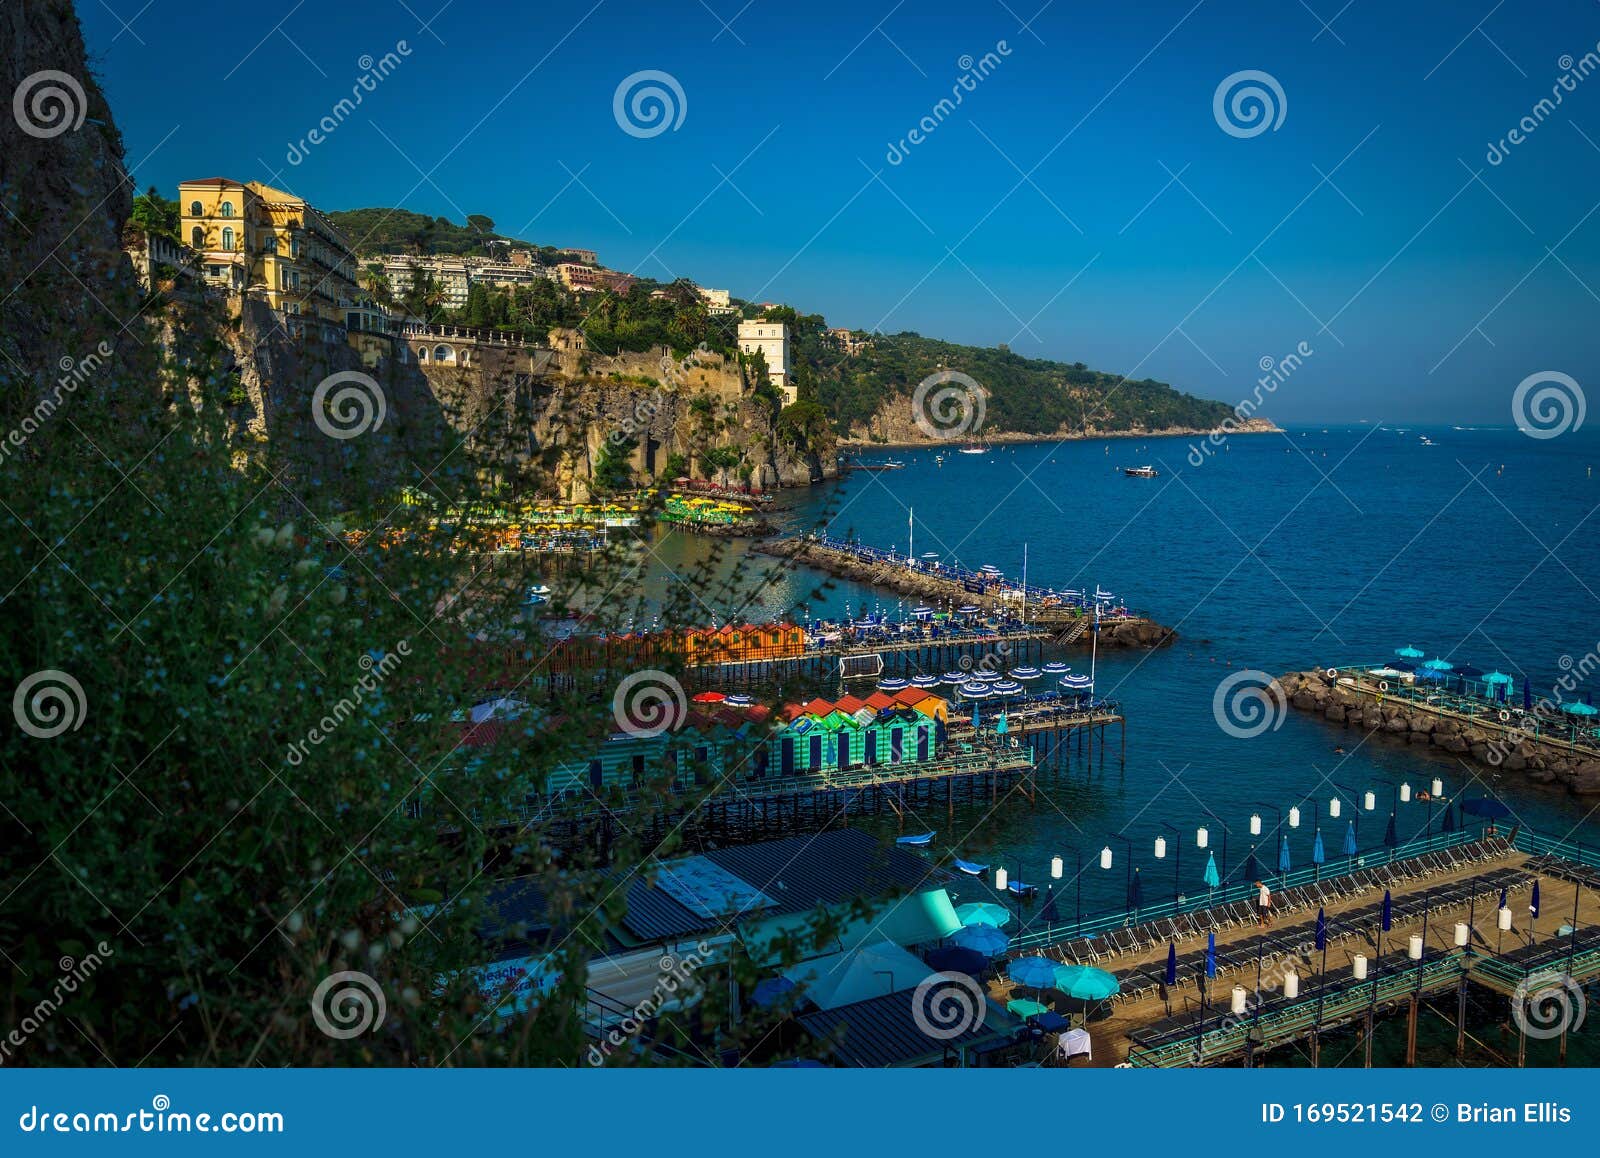 Italy - View from the Stairs on the Cliff - Sorrento Stock Photo ...